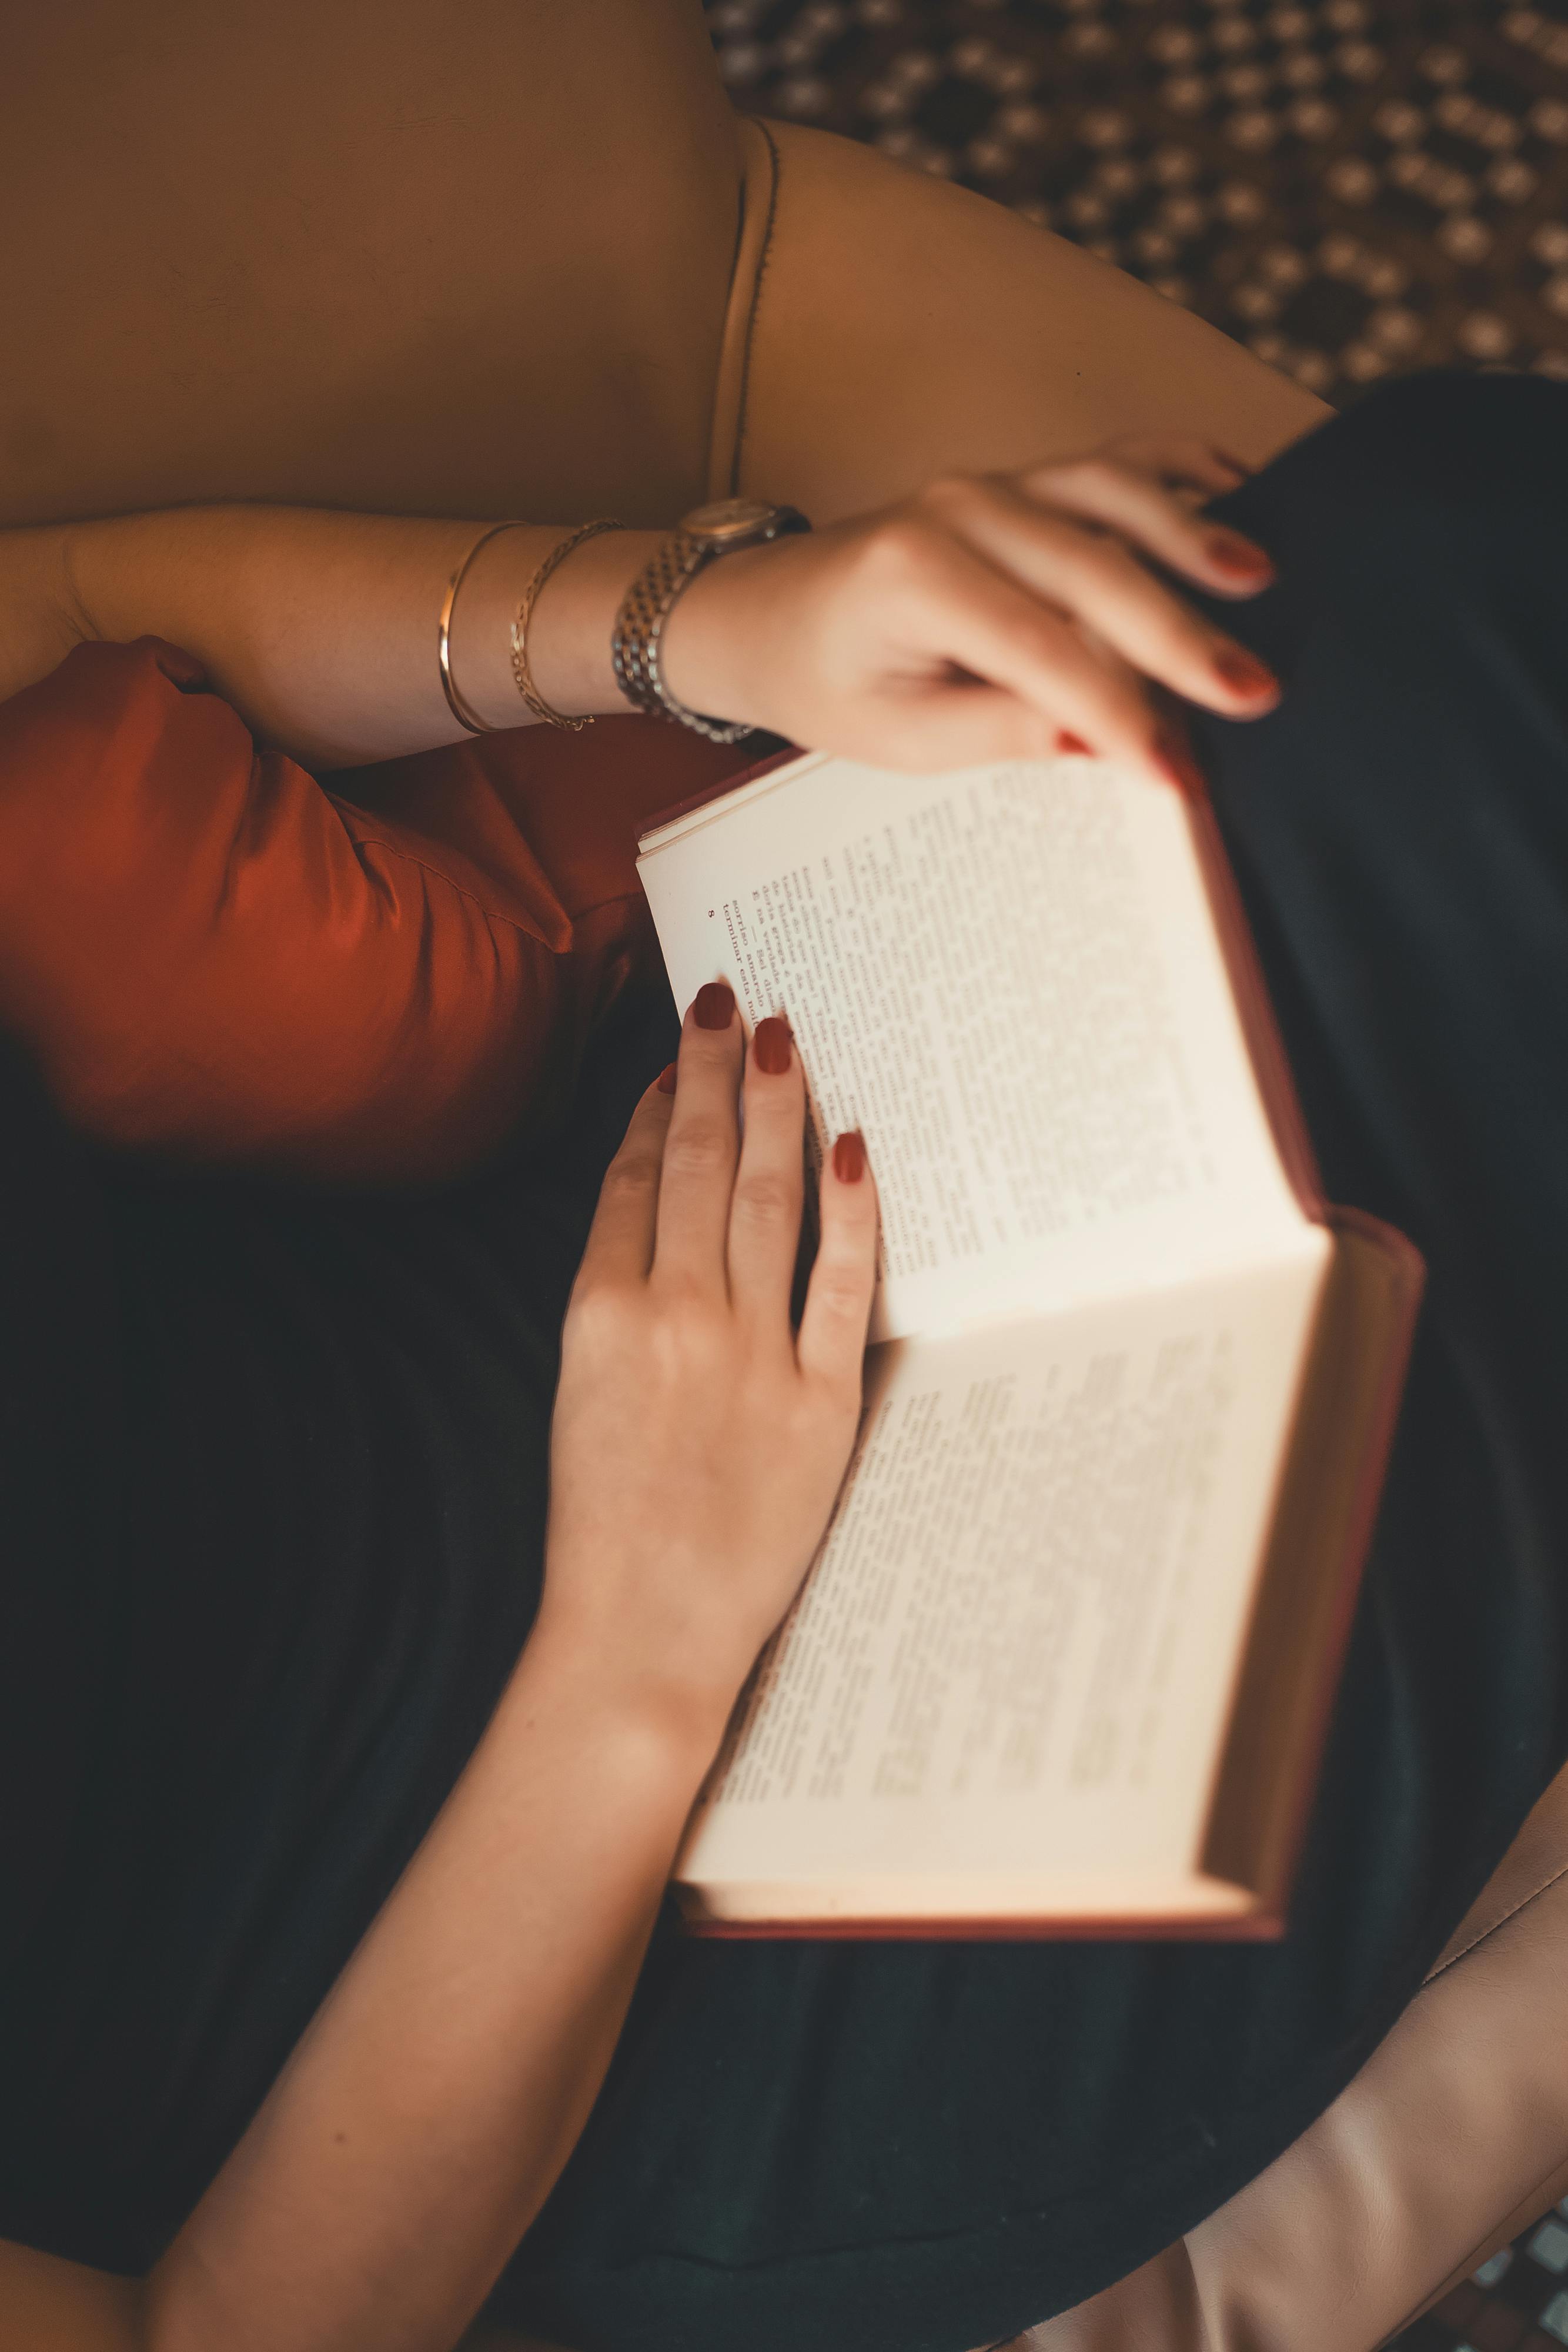 Free stock photo of book, open book, vintage